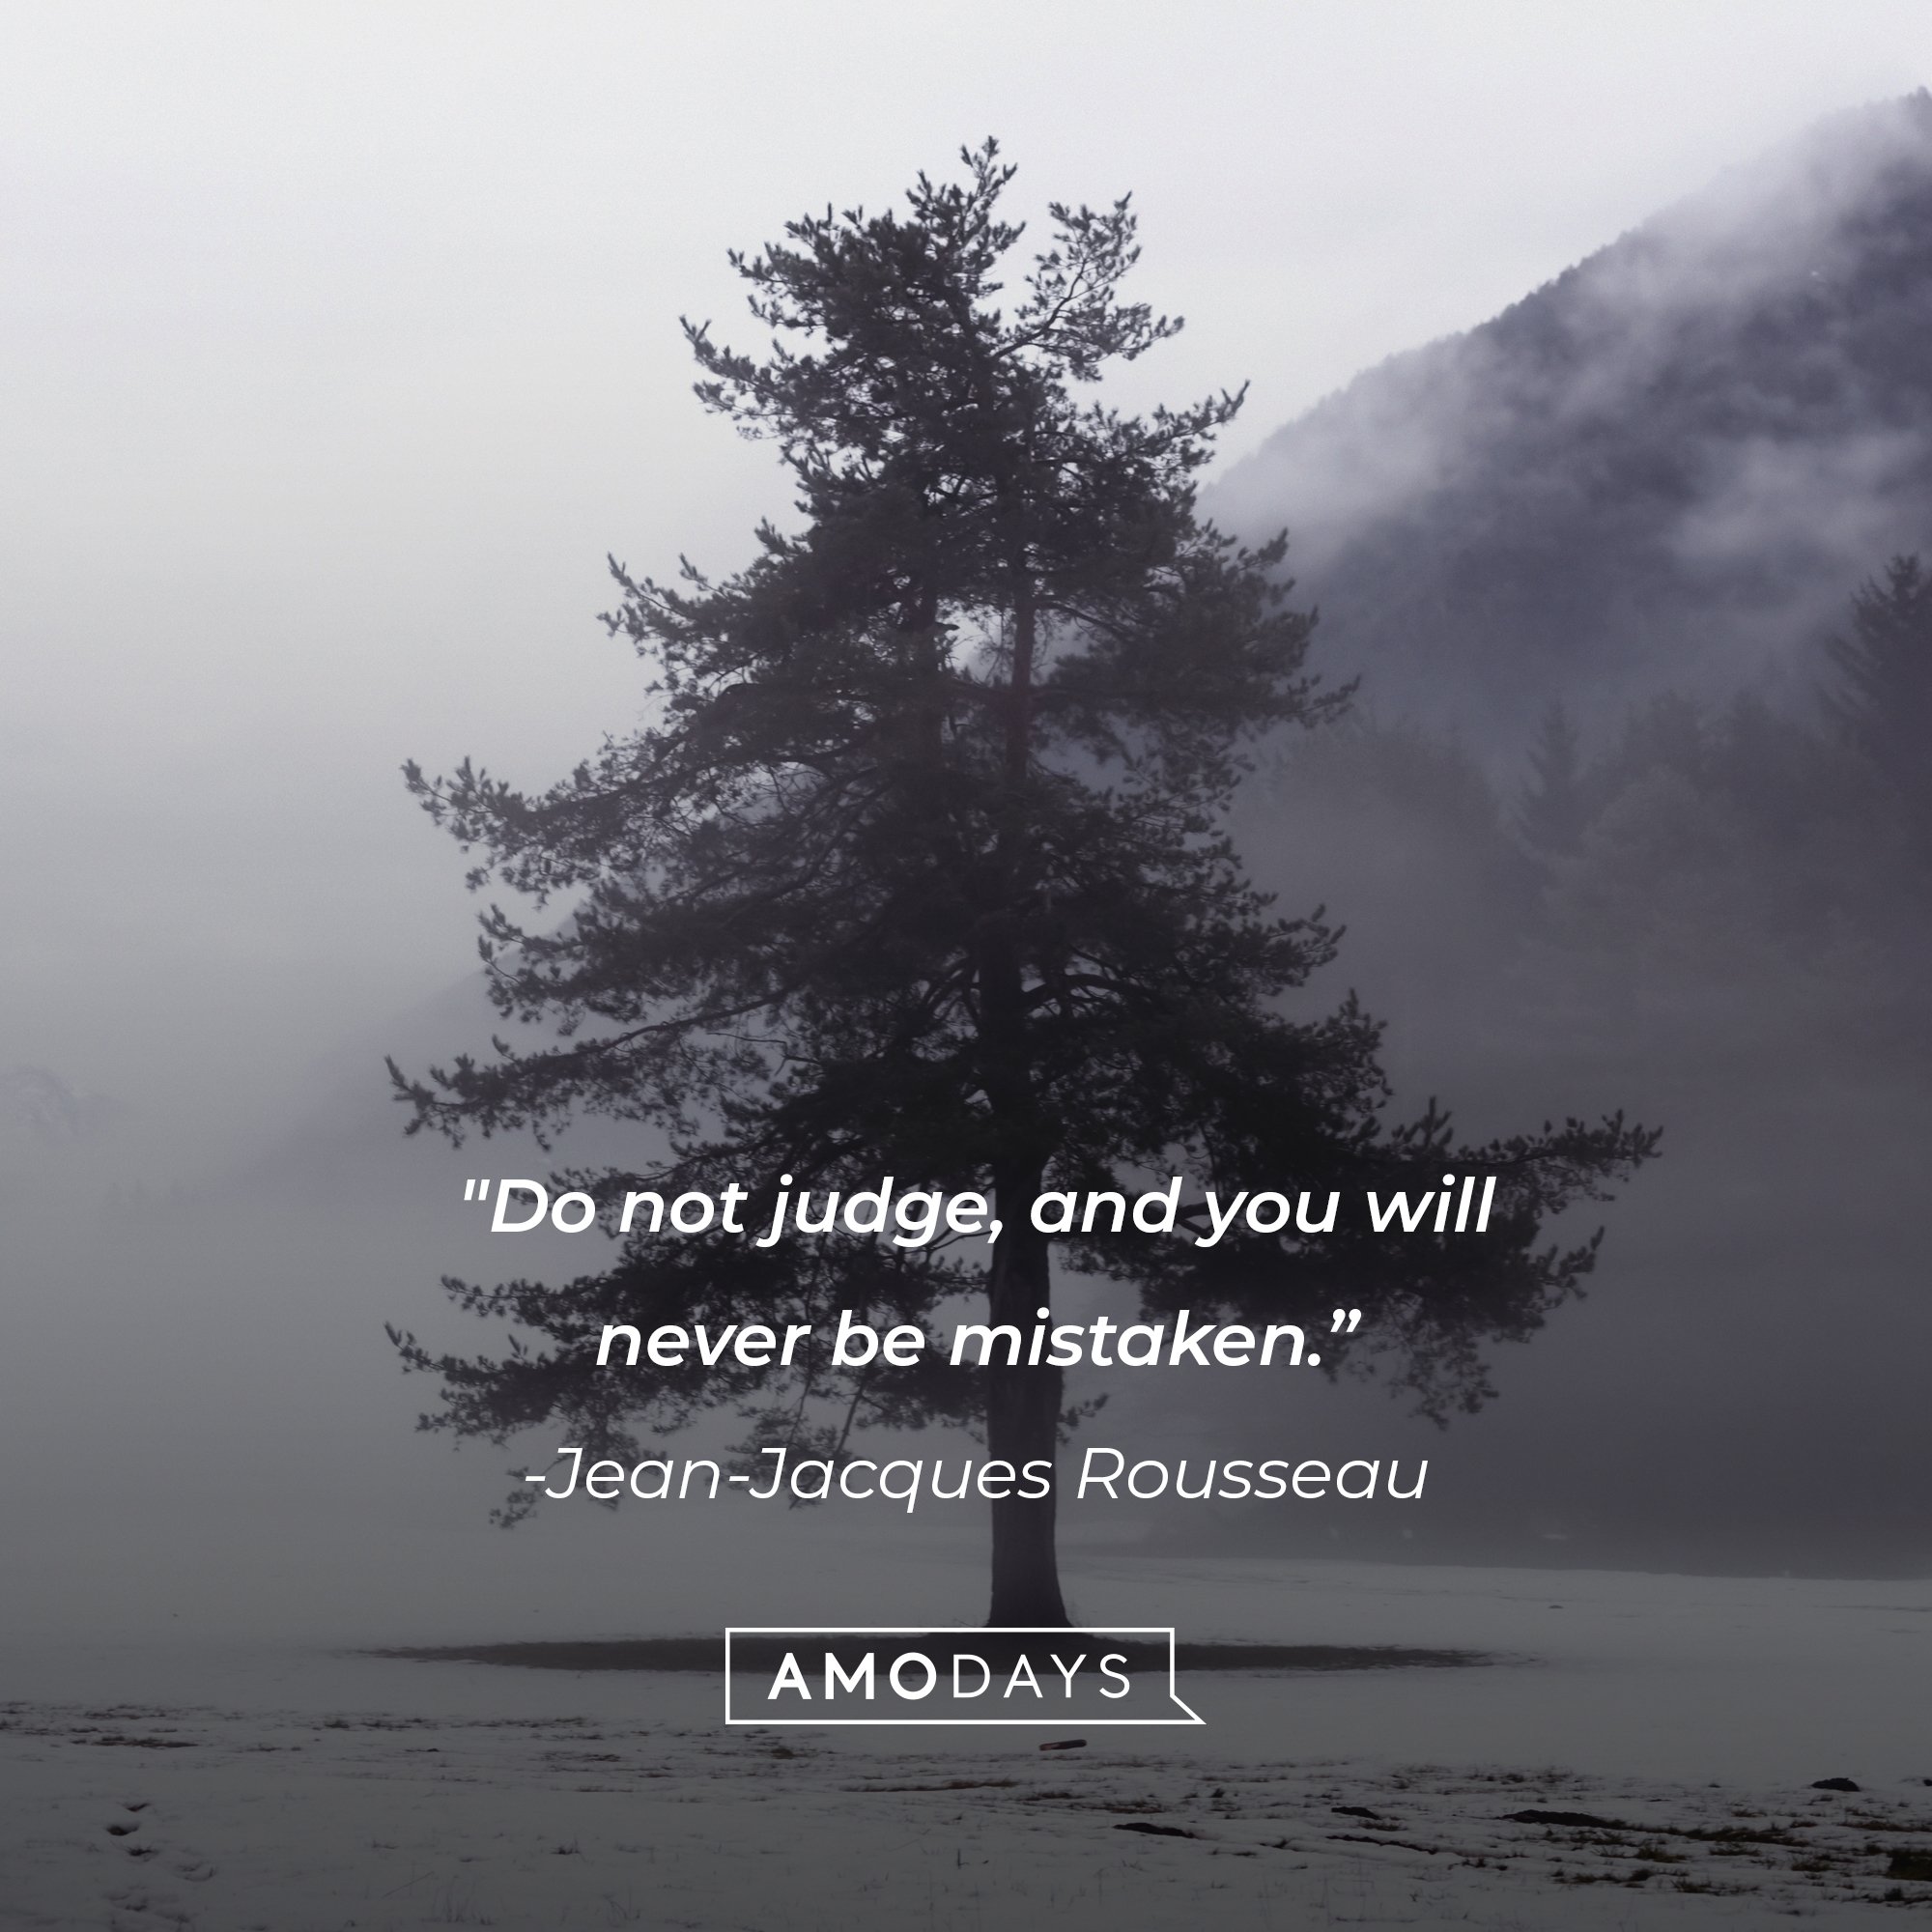 Jean-Jacques Rousseau’s quote: "Do not judge, and you will never be mistaken.” | Image: AmoDays 